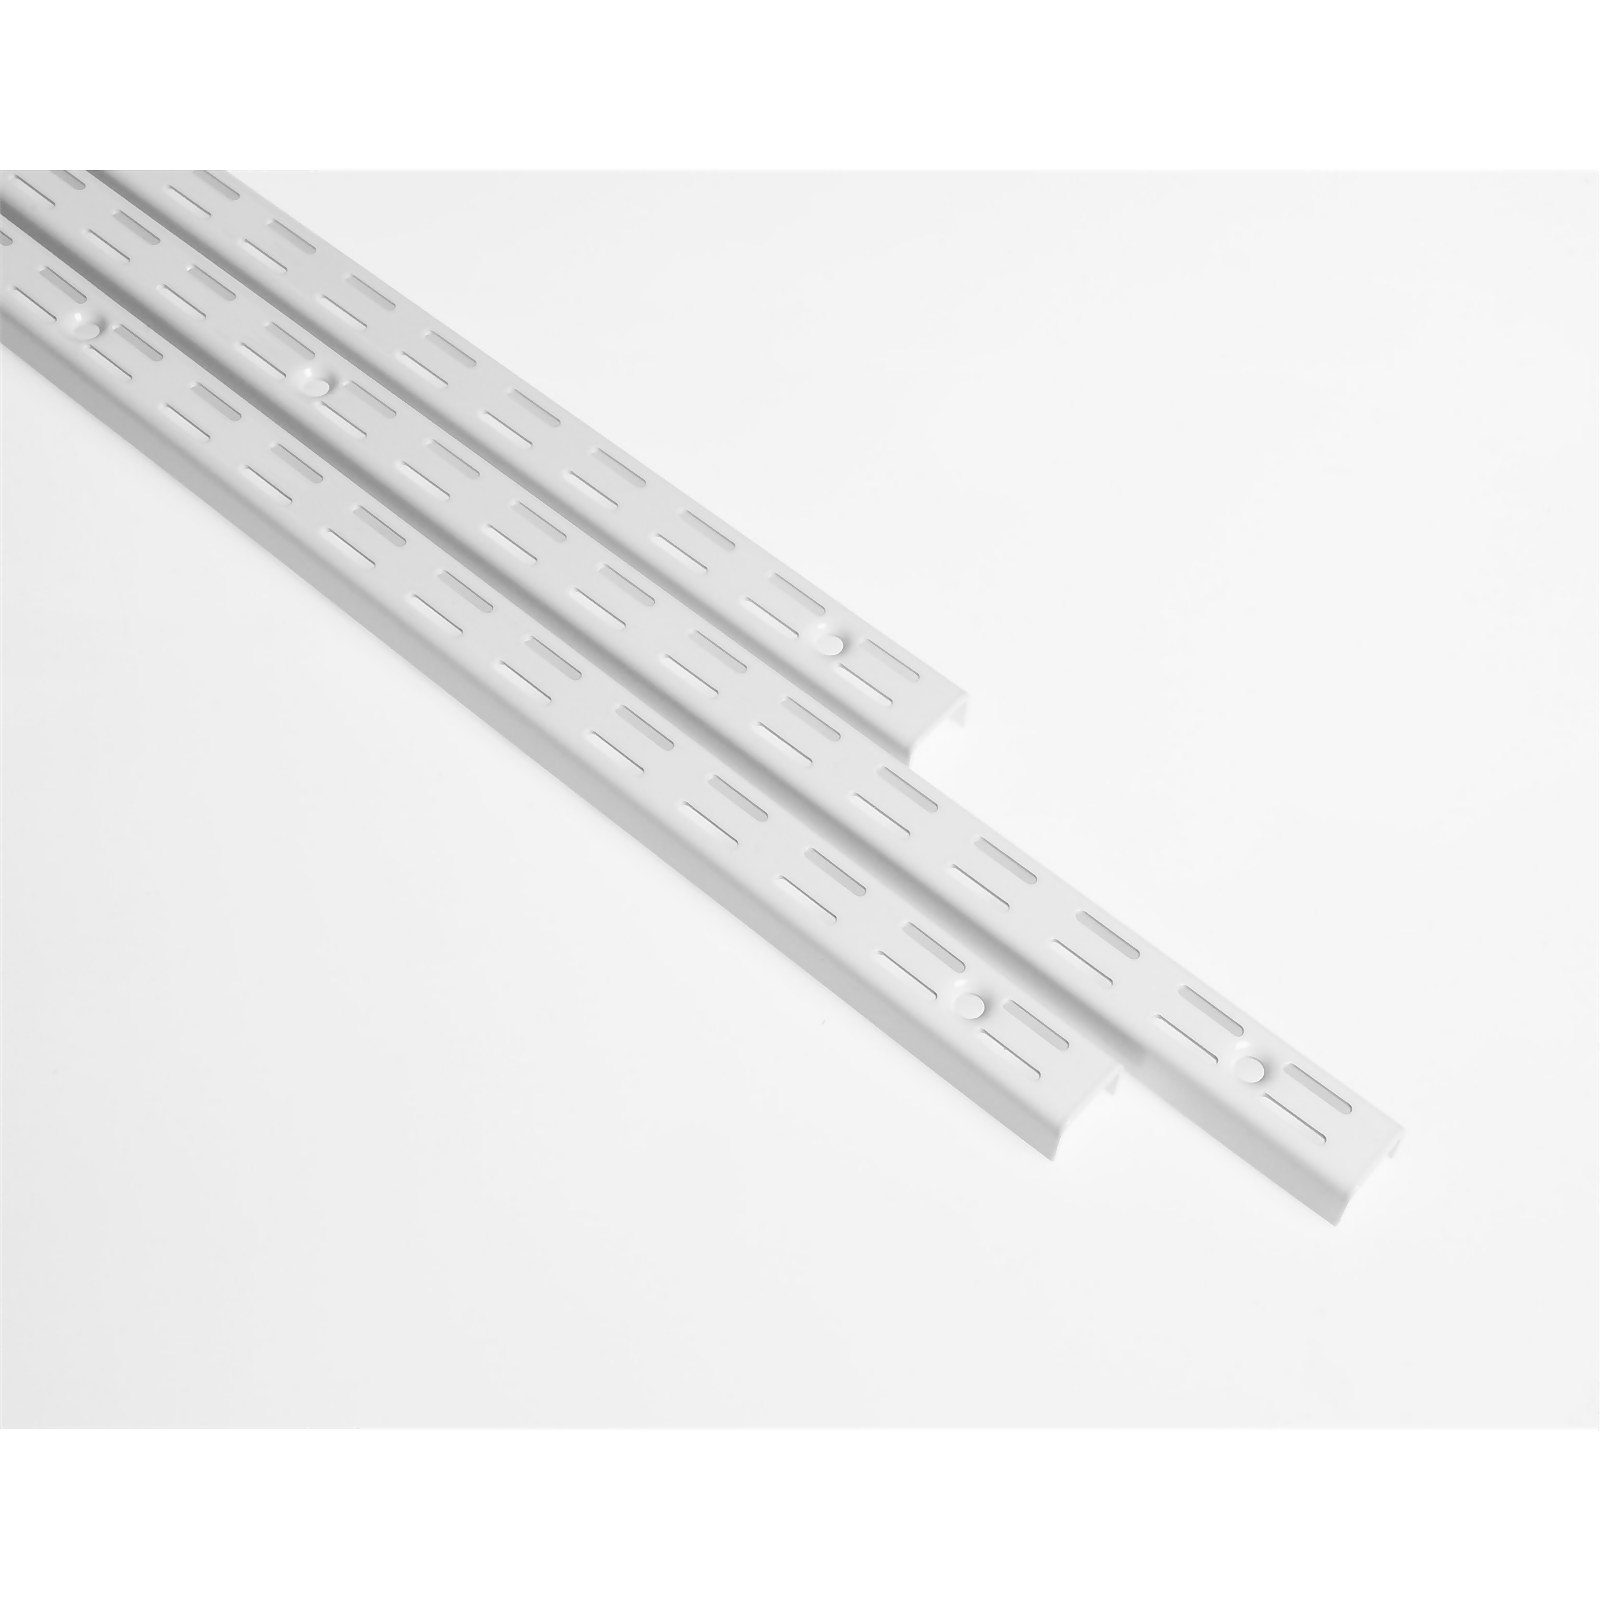 Photo of Anti-bacterial Twin Slot Shelving Kit - 1219mm White Twinslot And 320mm Brackets - White